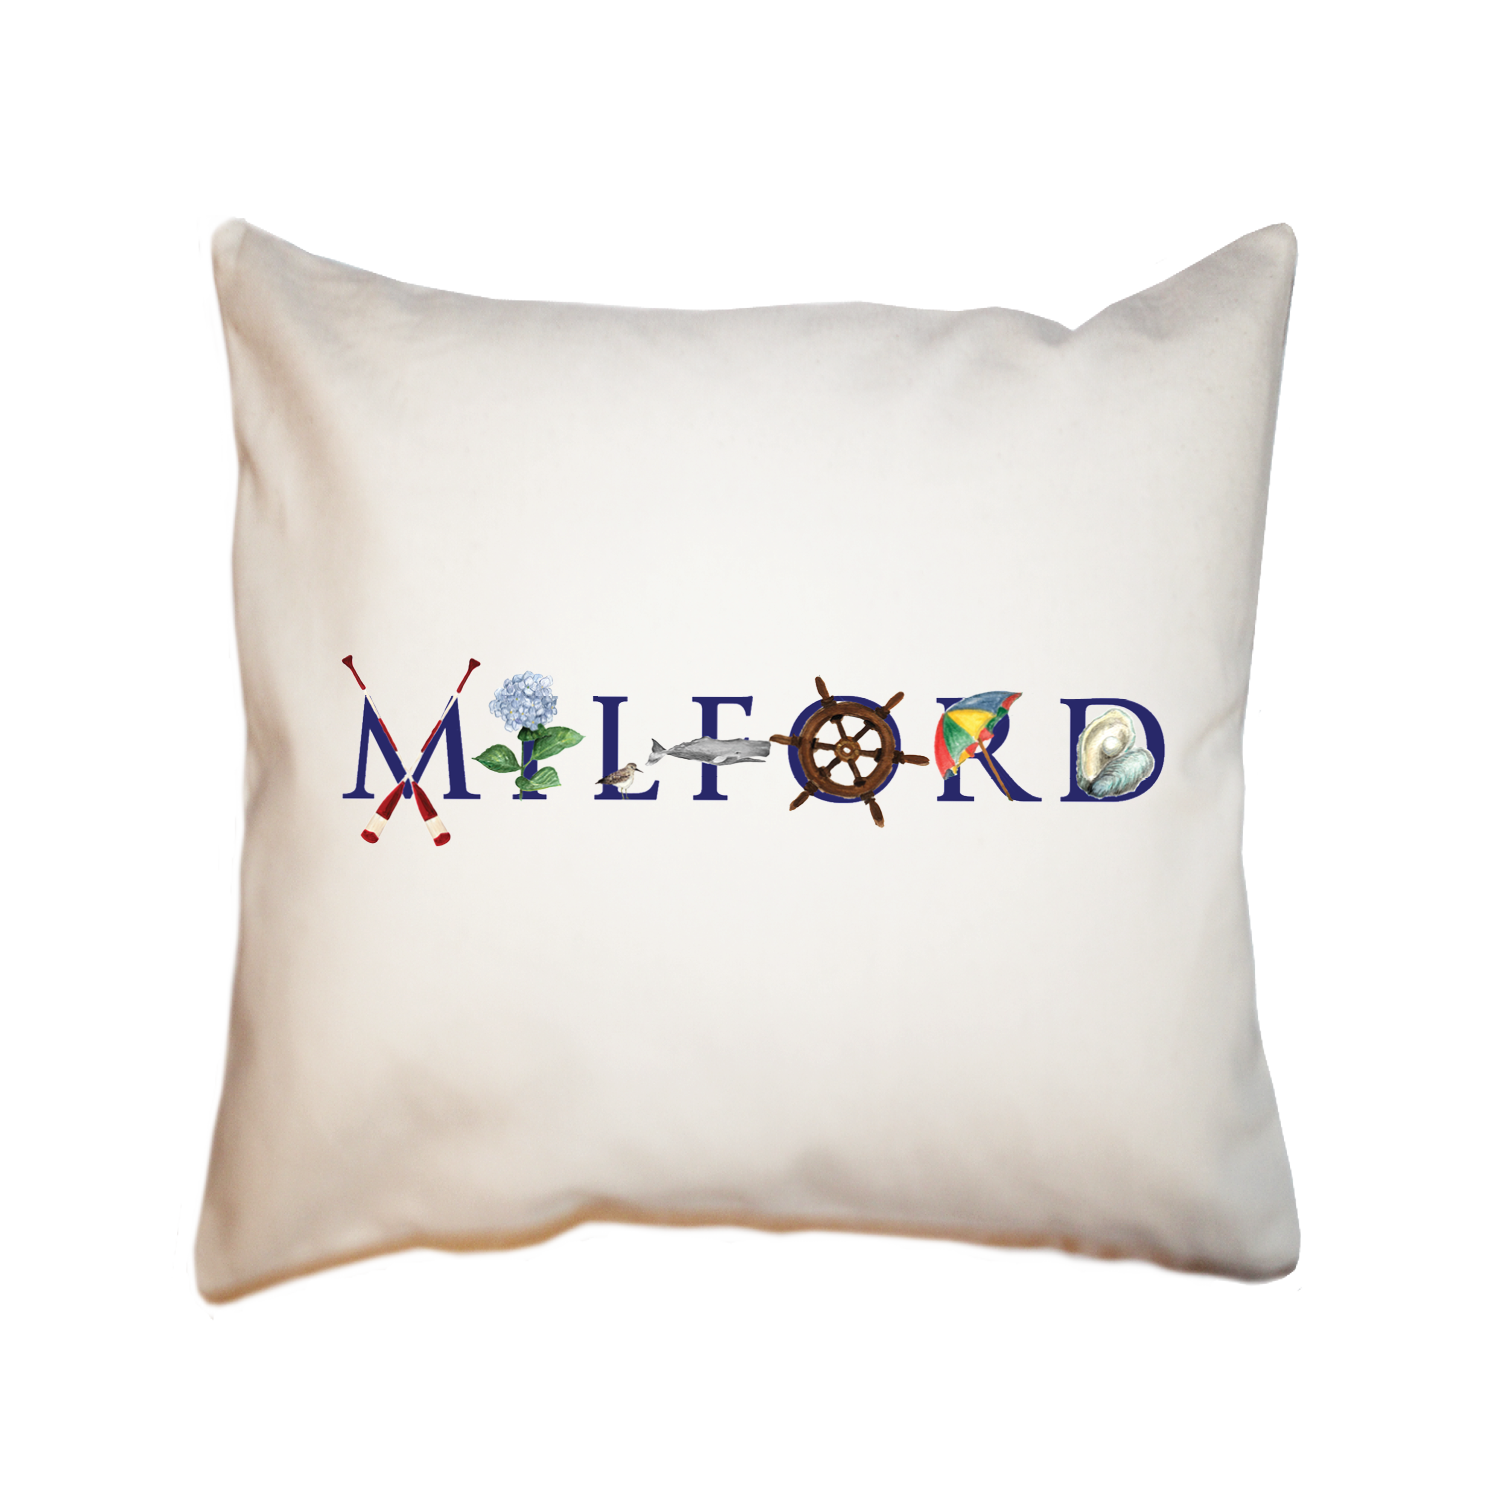 milford, ct square pillow